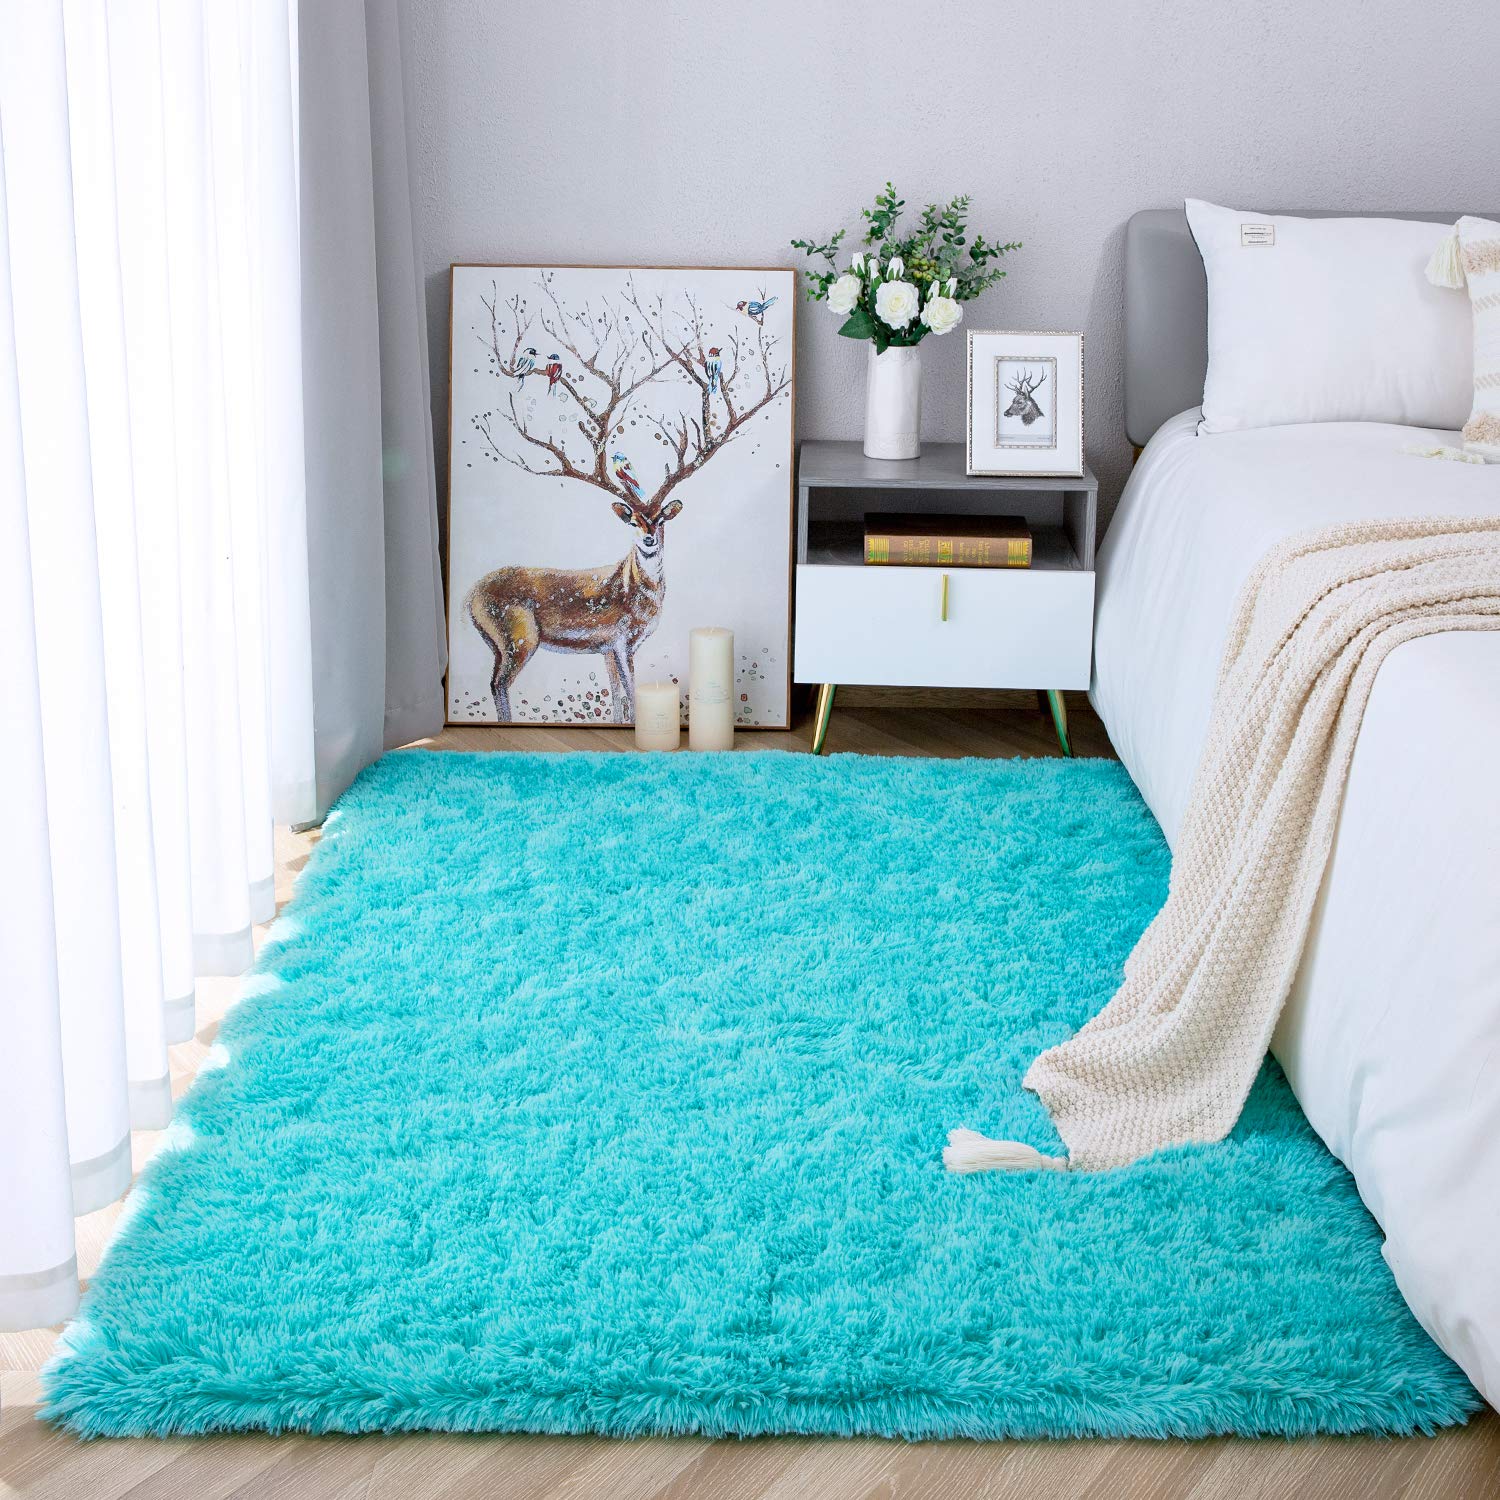 Give Light Blue Accents As Rug